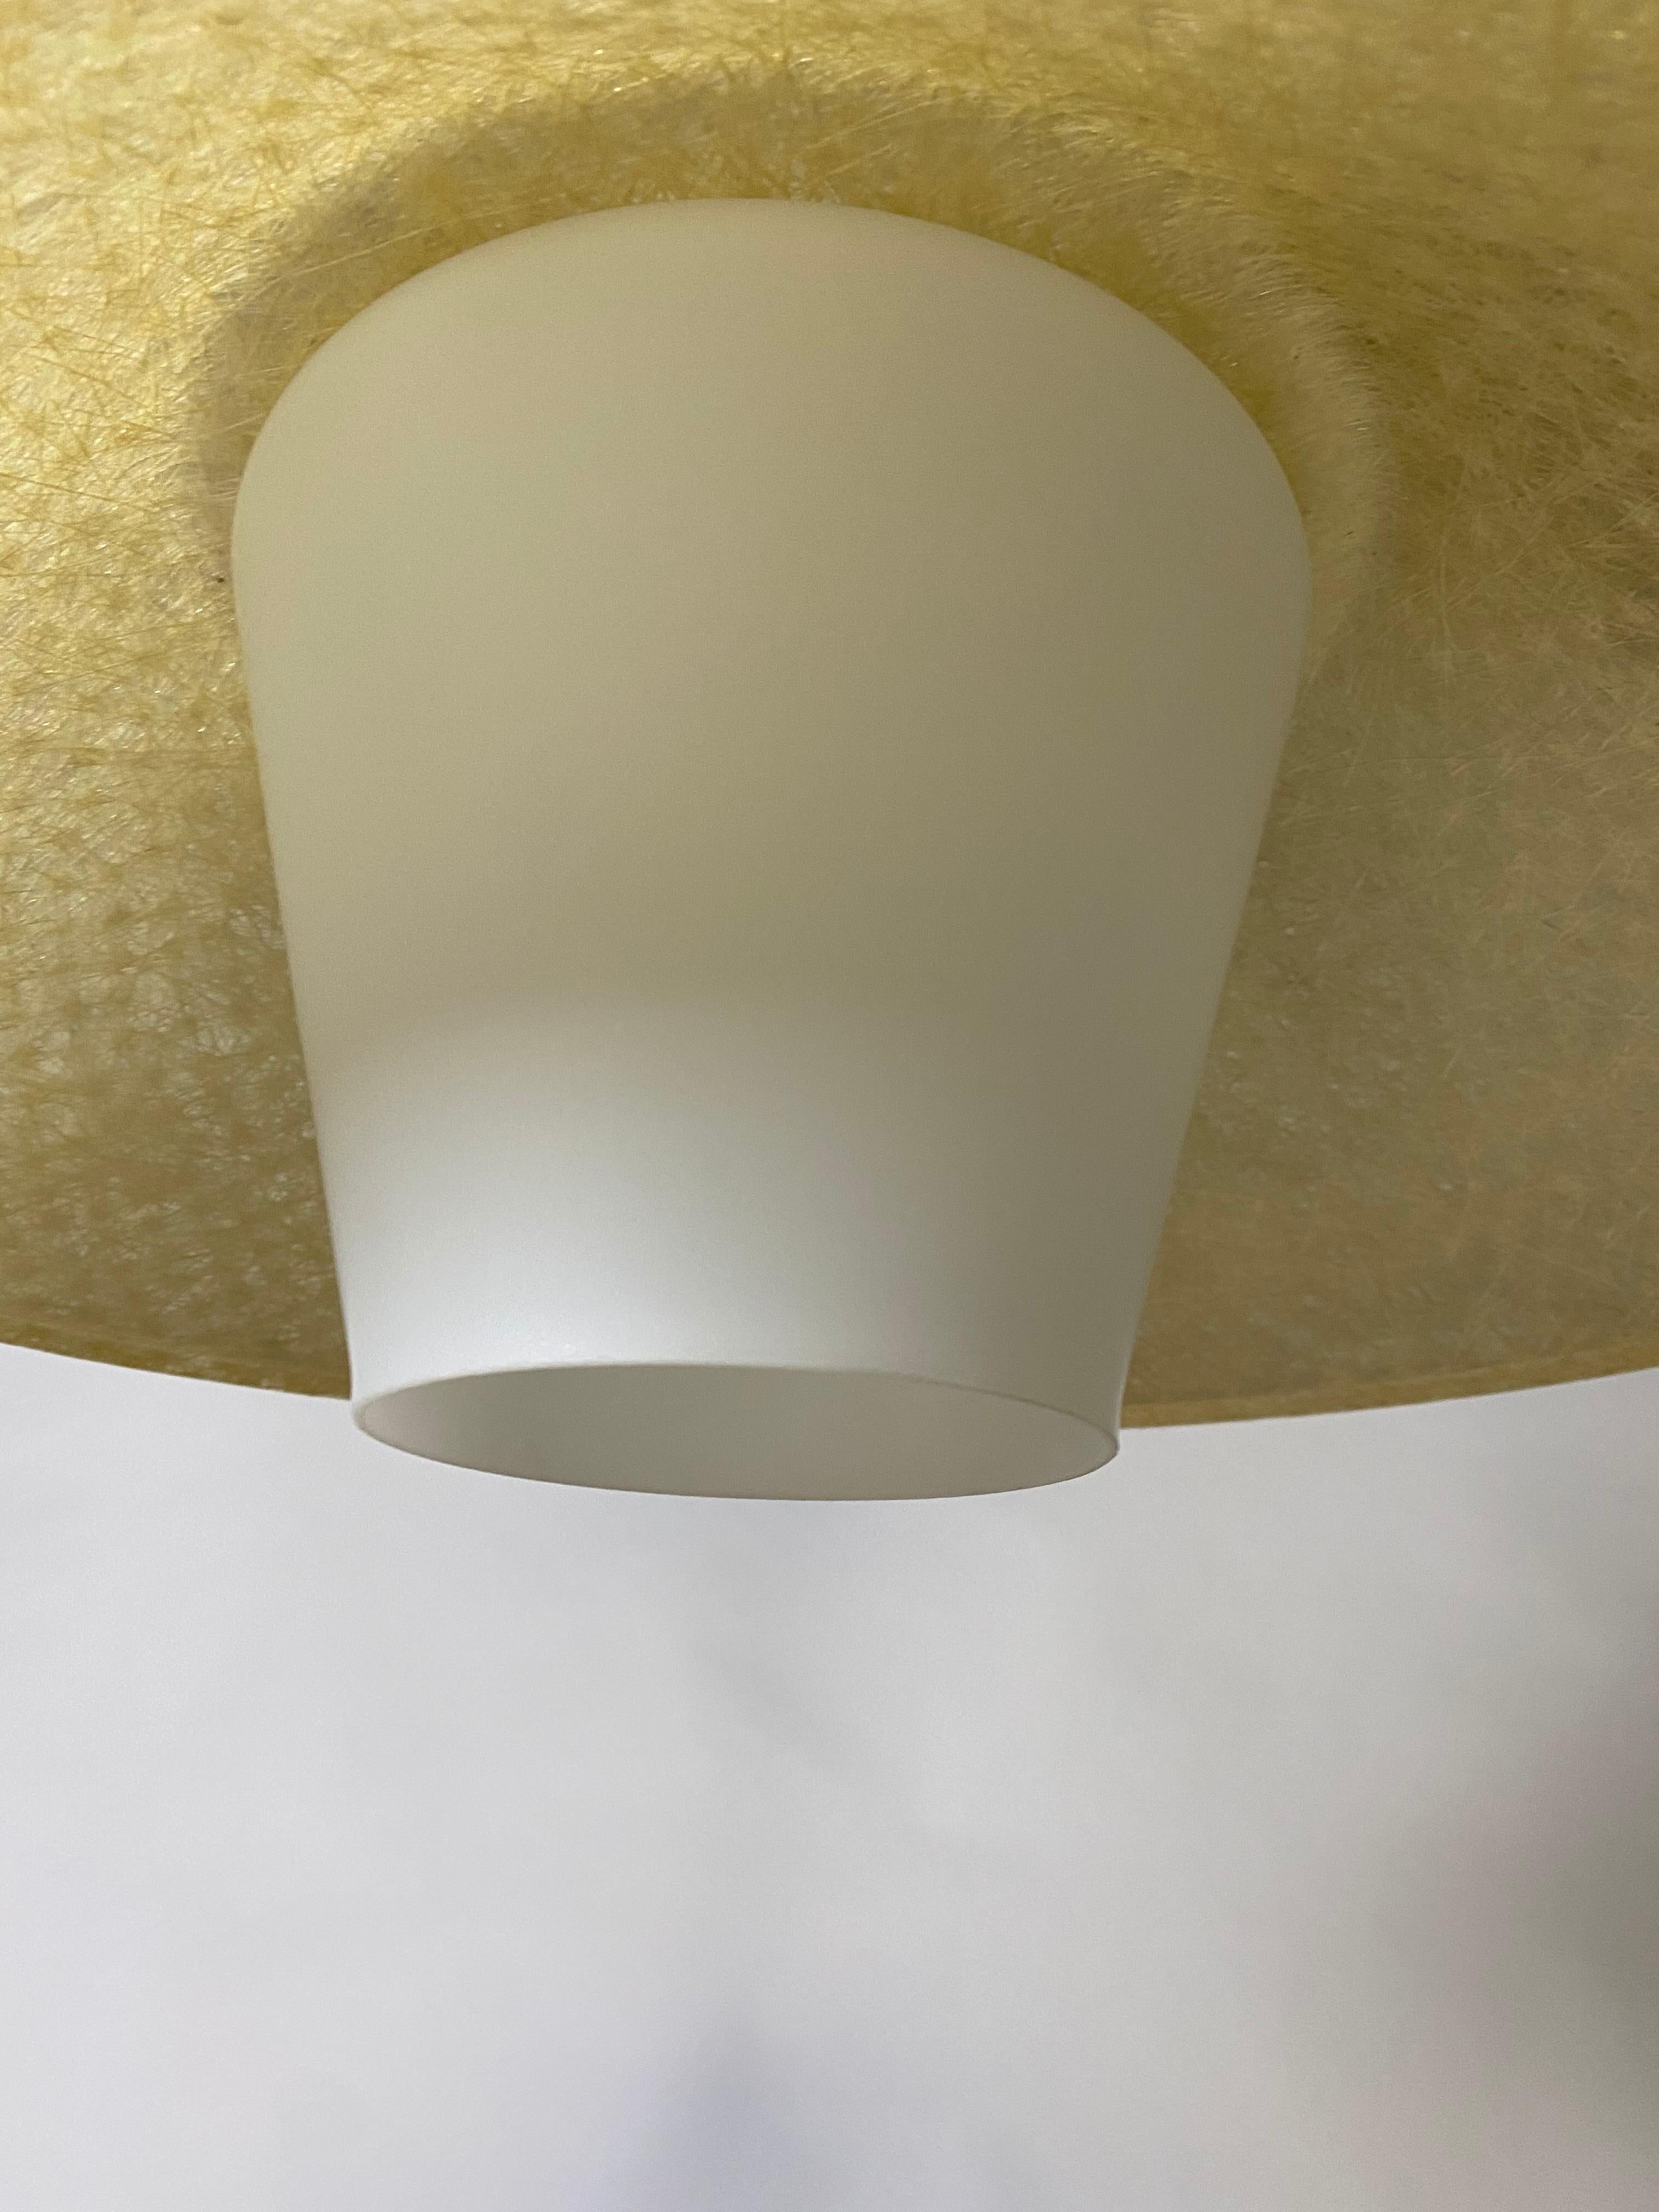 Rare Fiberglass /Opaline Glass Ceiling Lamp by Louis Kalff for Philips, 1950s For Sale 5